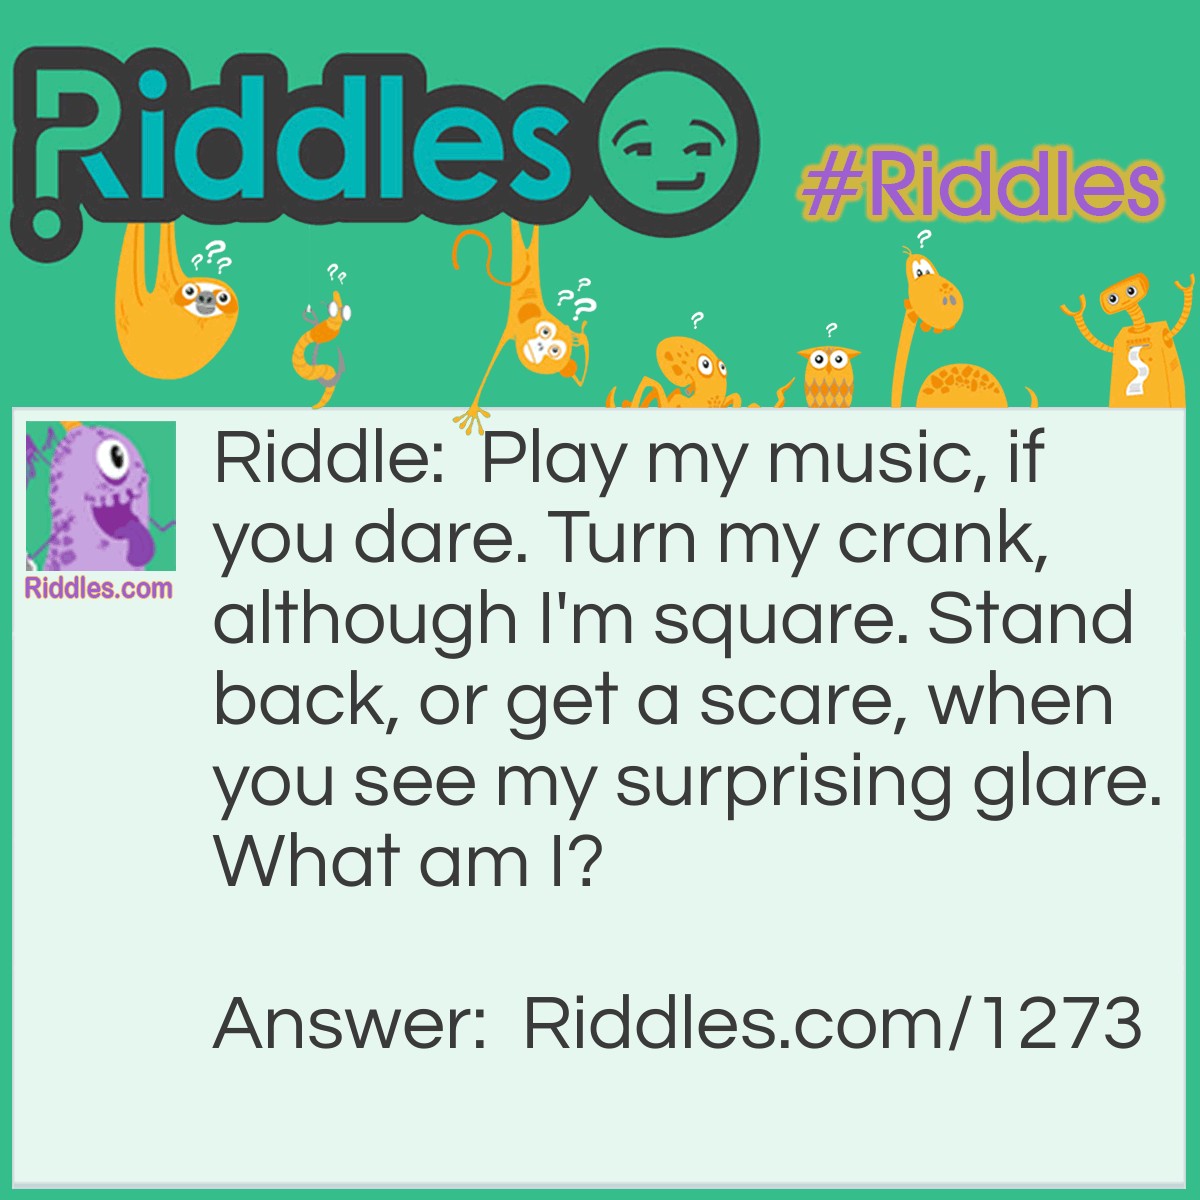 Riddle: Play my music, if you dare. Turn my crank, although I'm square. Stand back, or get a scare, when you see my surprising glare.
What am I? Answer: Jack-in-the-Box.